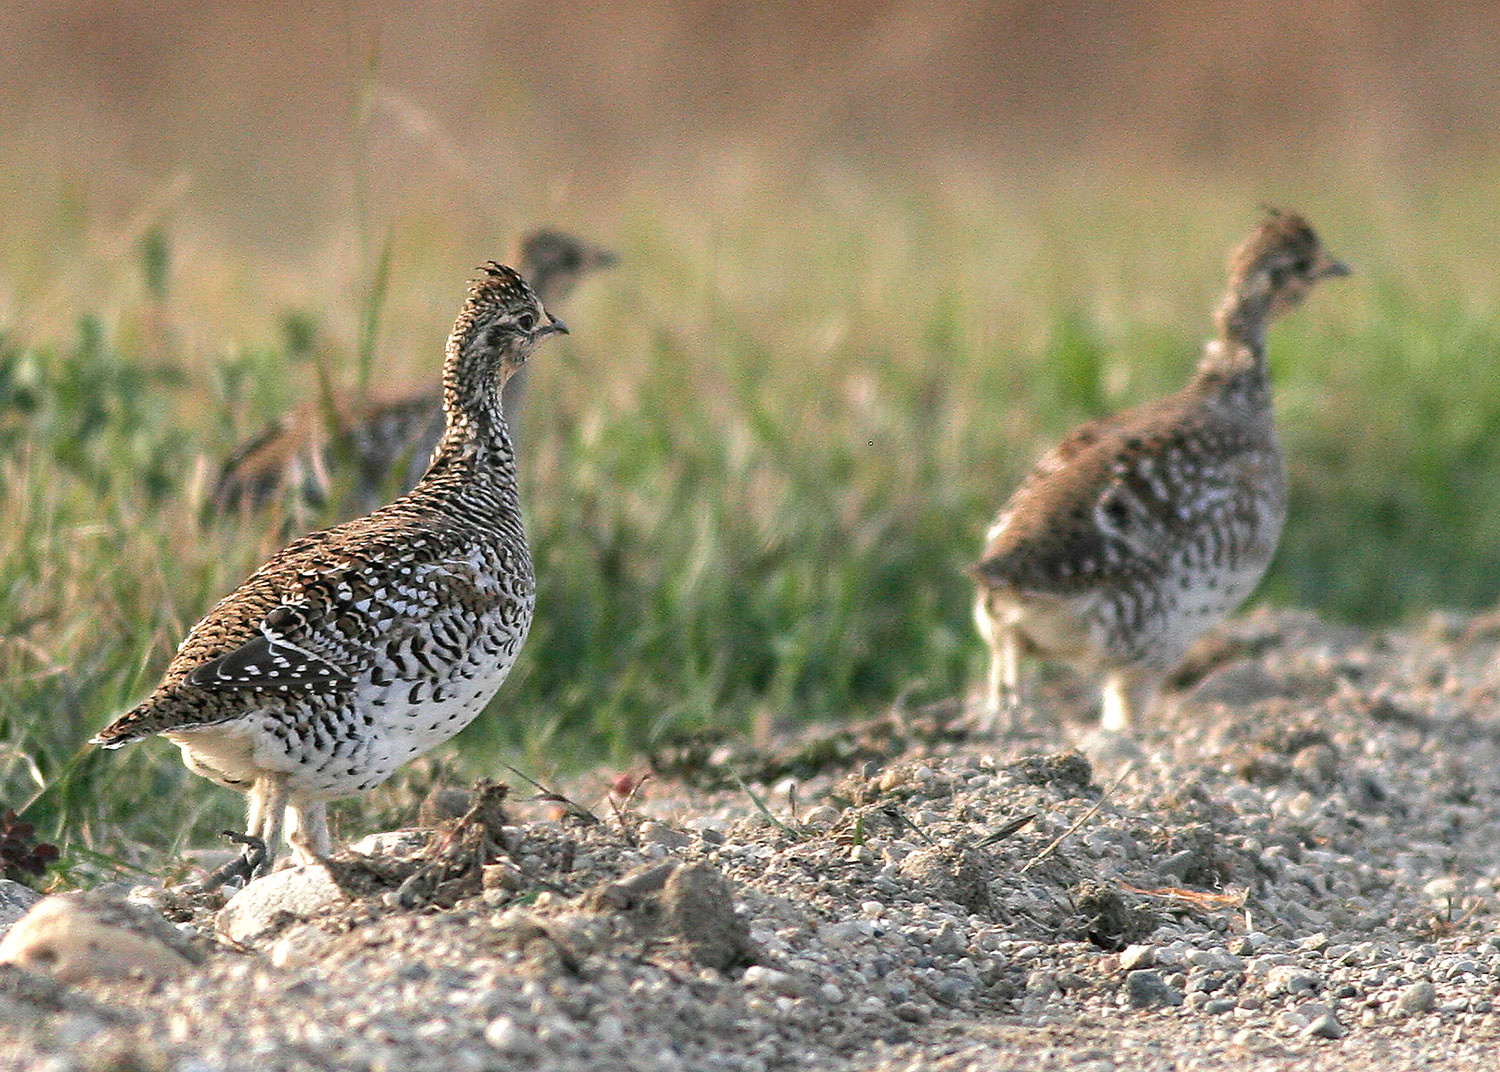 Sharp-tailed grouse